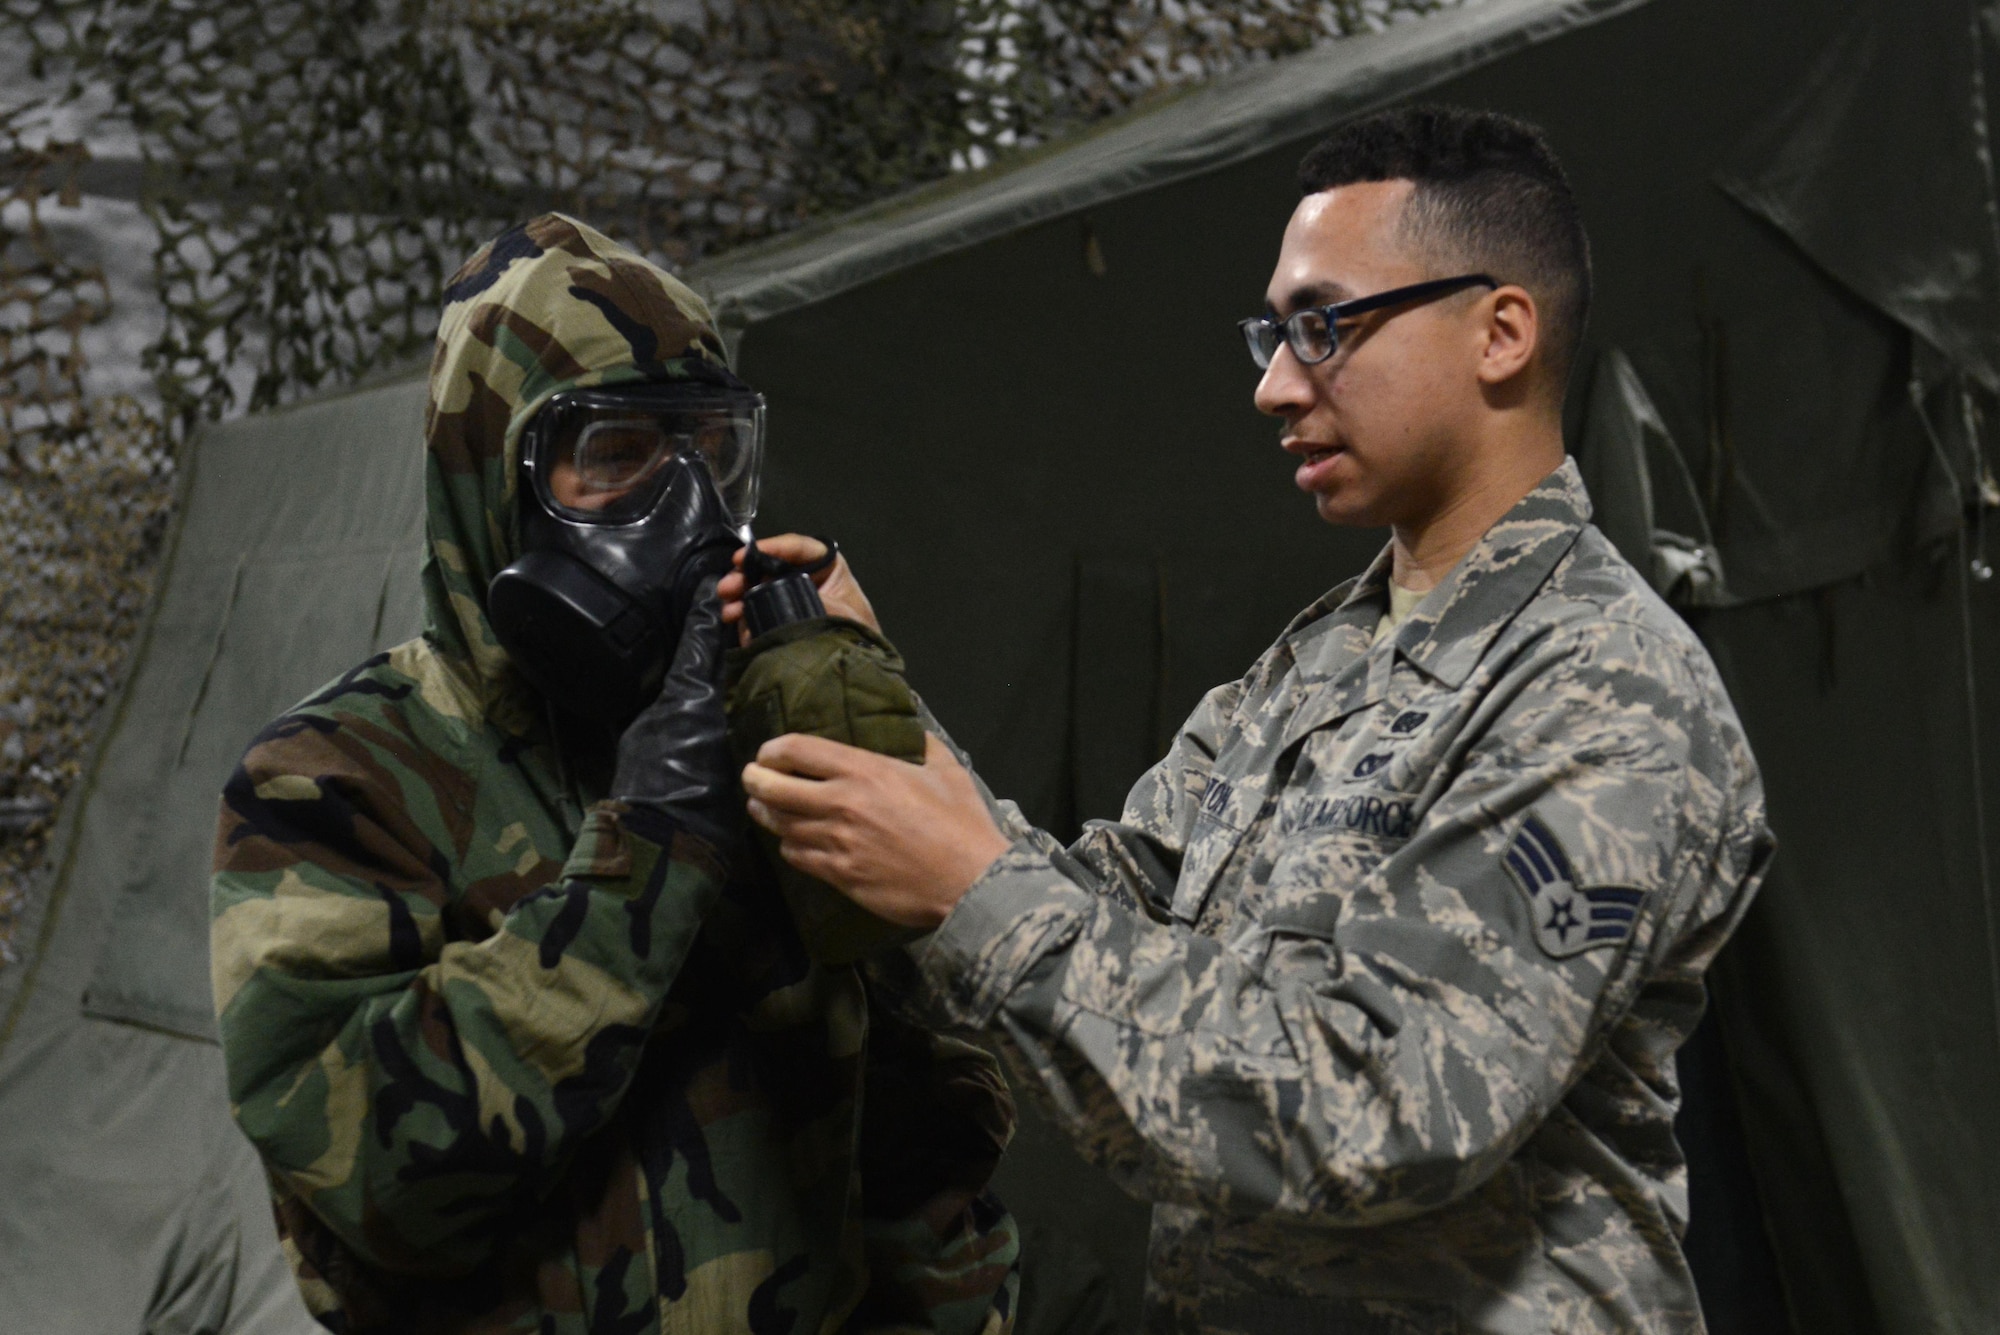 Senior Airman Alexander Barton (right), 773d Civil Engineer Squadron emergency management trainer, demonstrates how to drink from a canteen with a gas mask during a Chemical, Biological, Radiological, and Nuclear defense survival skills training class at Joint Base Elmendorf-Richardson, Alaska, Aug. 22. The two-hour CBRN class reminds Airmen of the various equipment and proper procedures used pre- and post-attack, and puts the Airmen’s knowledge to the test with an application of this information in full Mission Oriented Protected Posture gear.